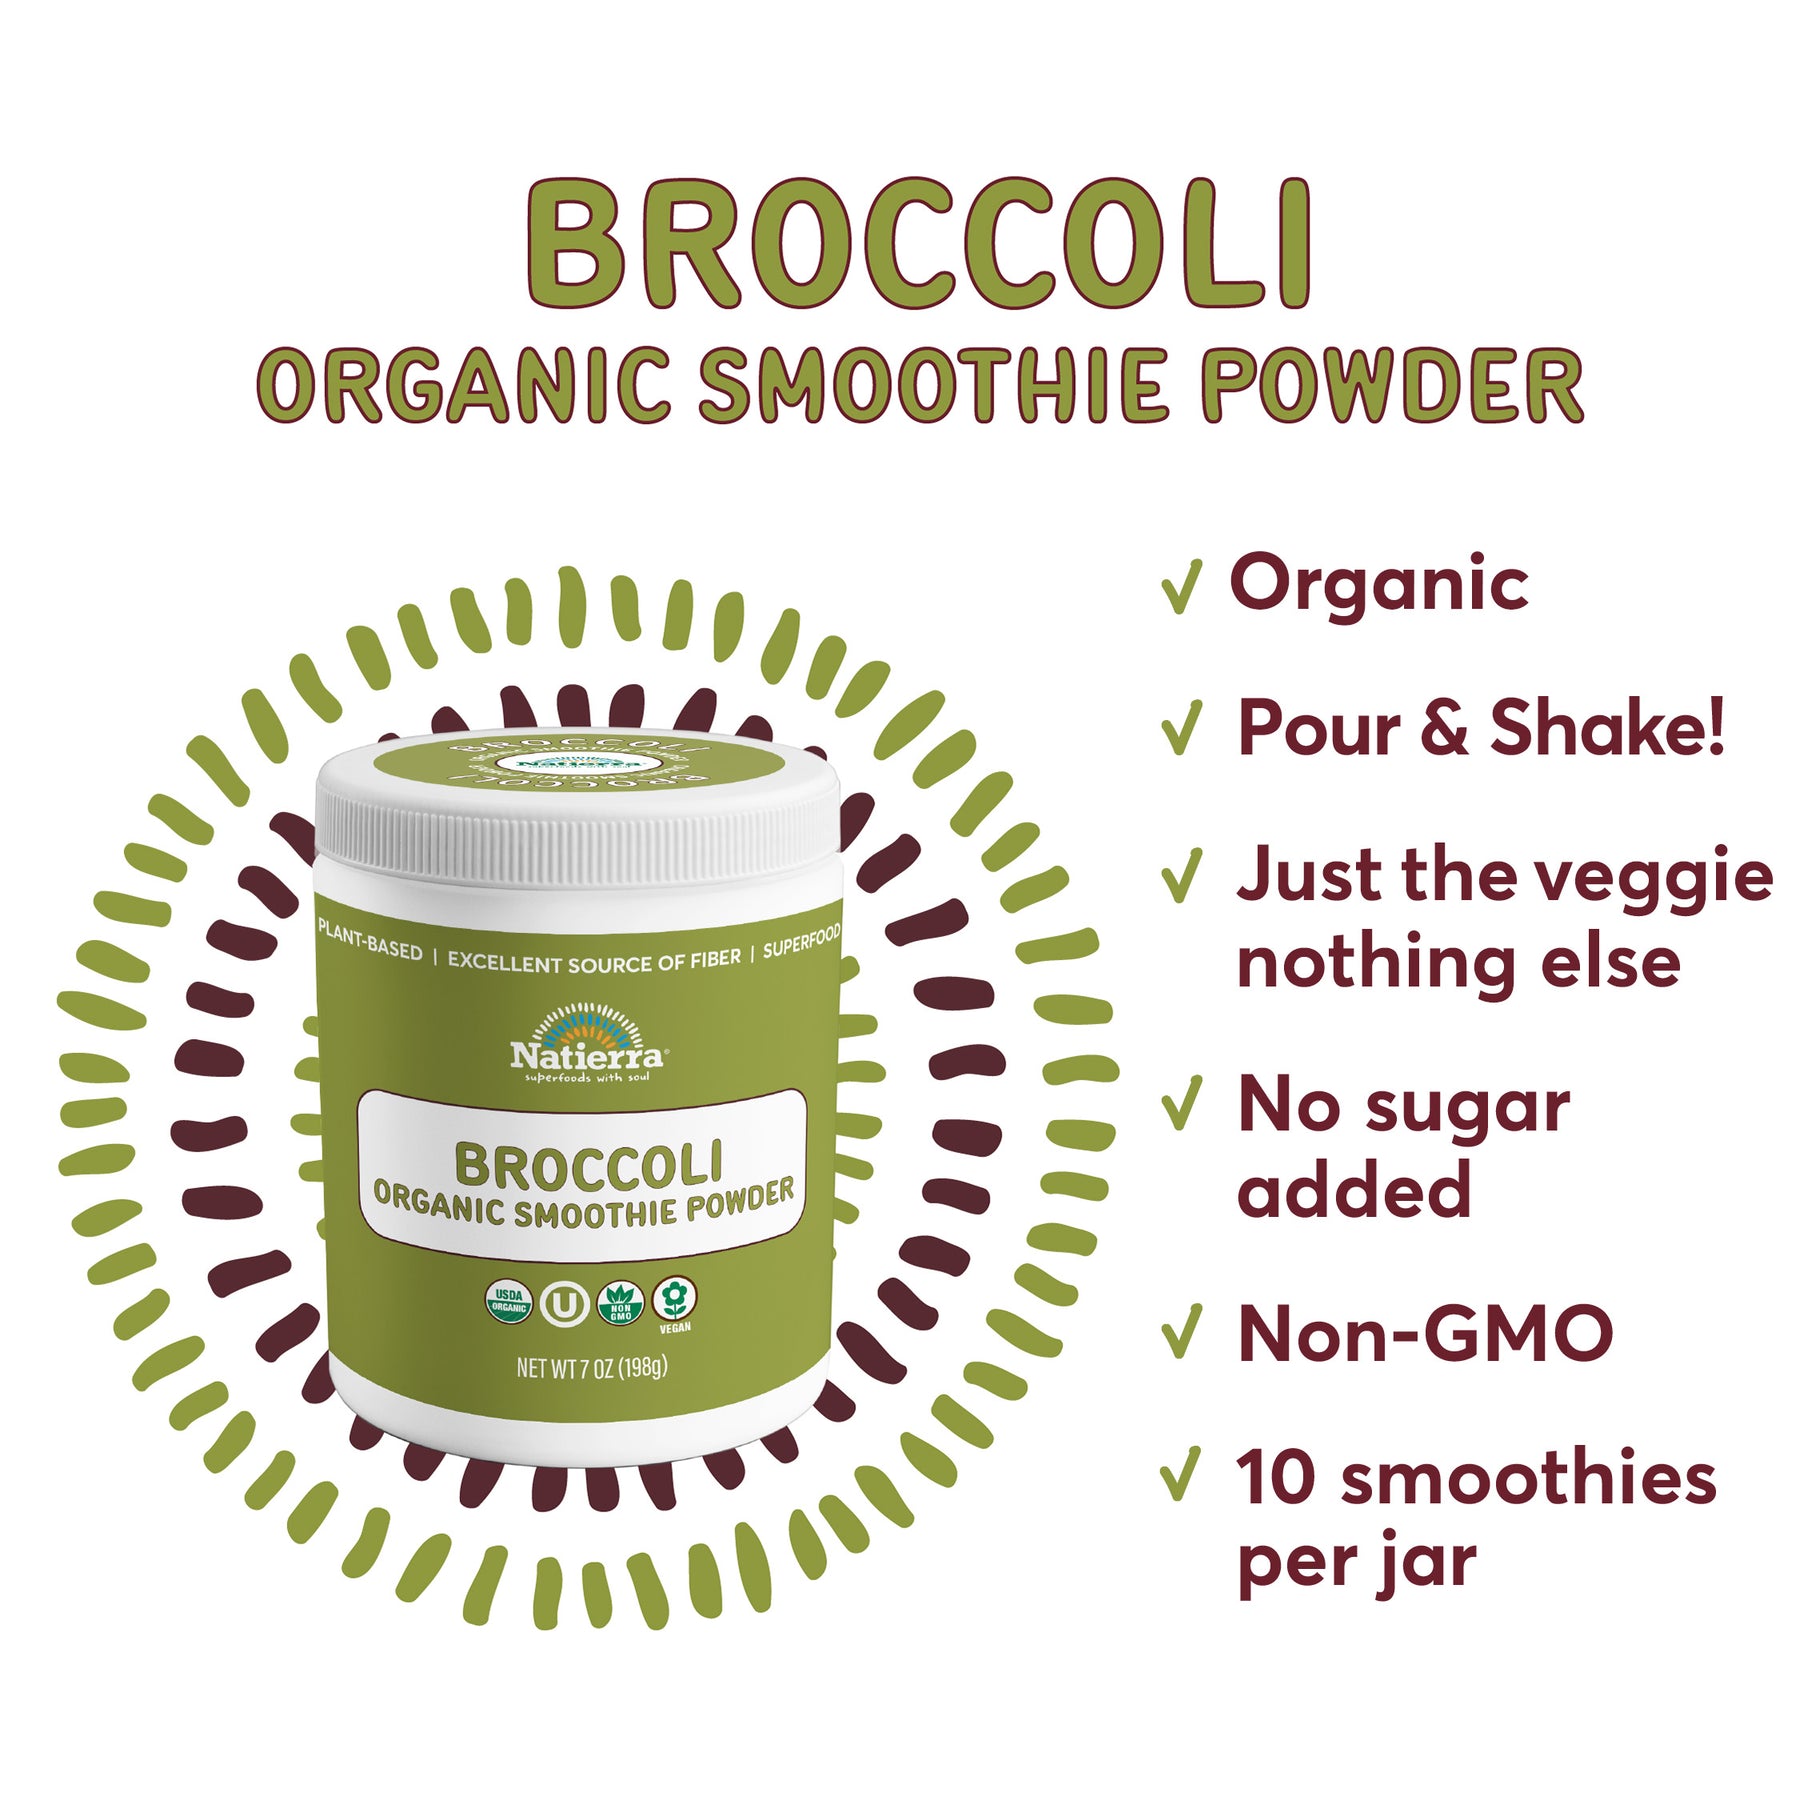 A jar of Natierra Brocoli Organic Smoothie Powder next to list of main product claims